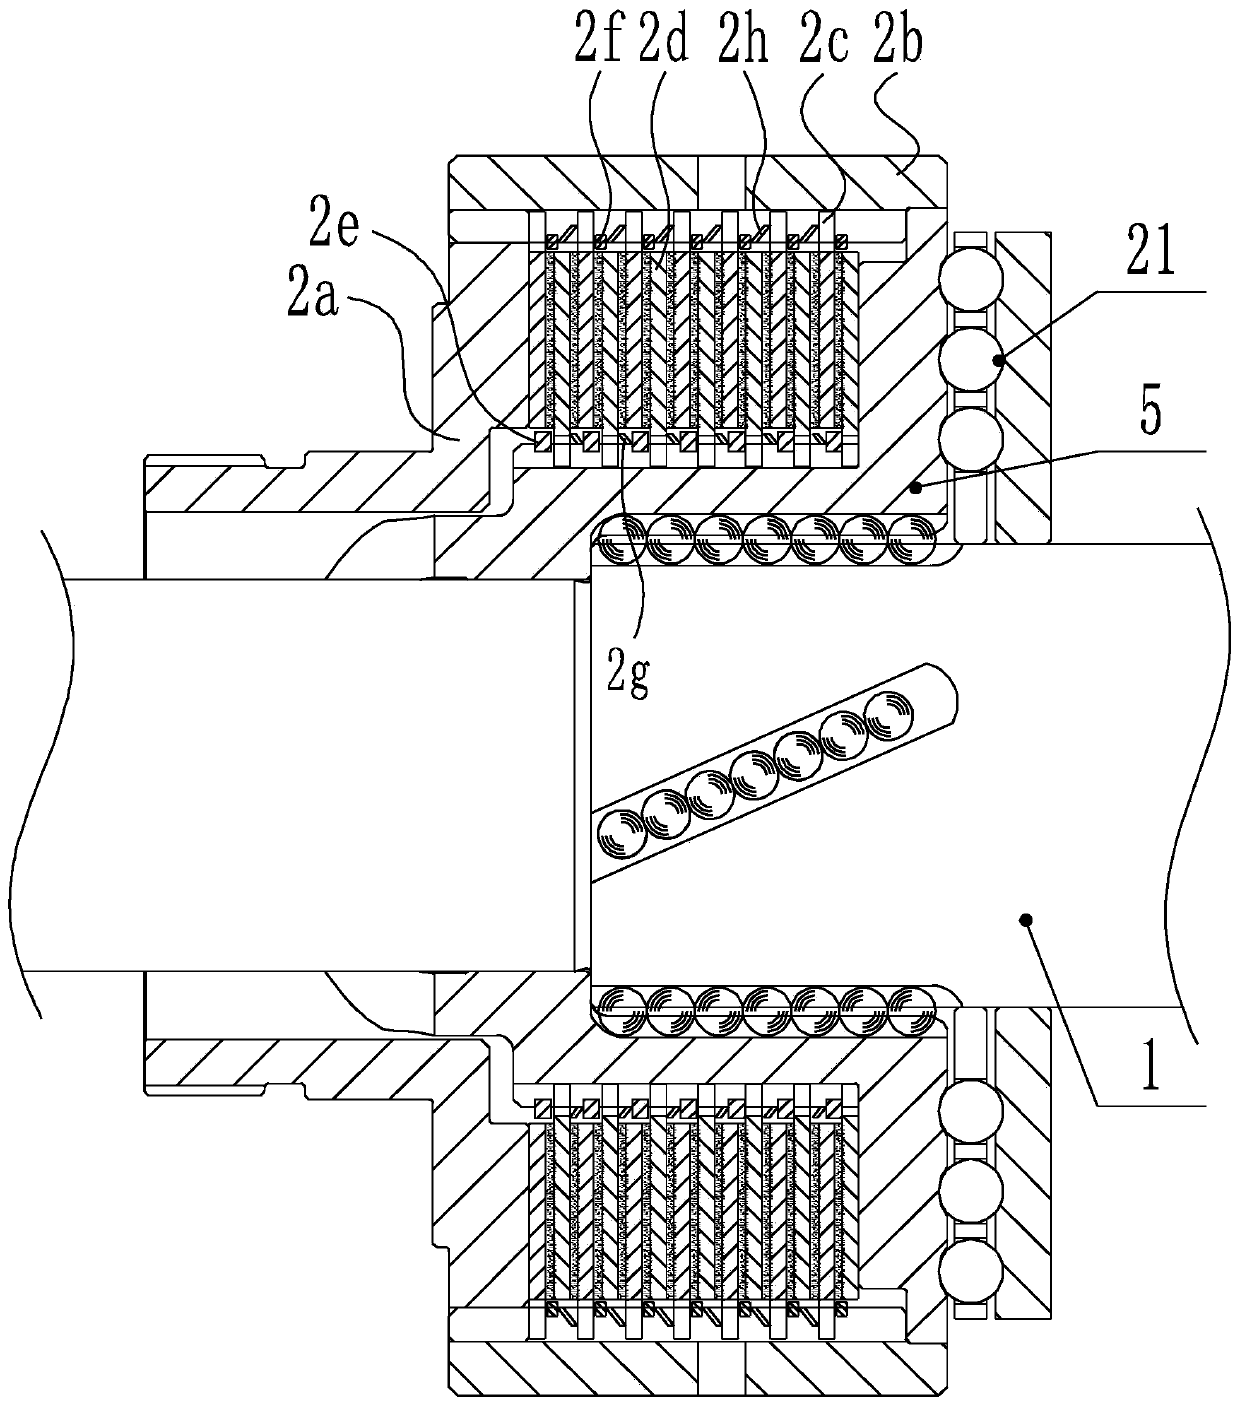 Self-adaptive multi-disc sequenced large torque friction clutch